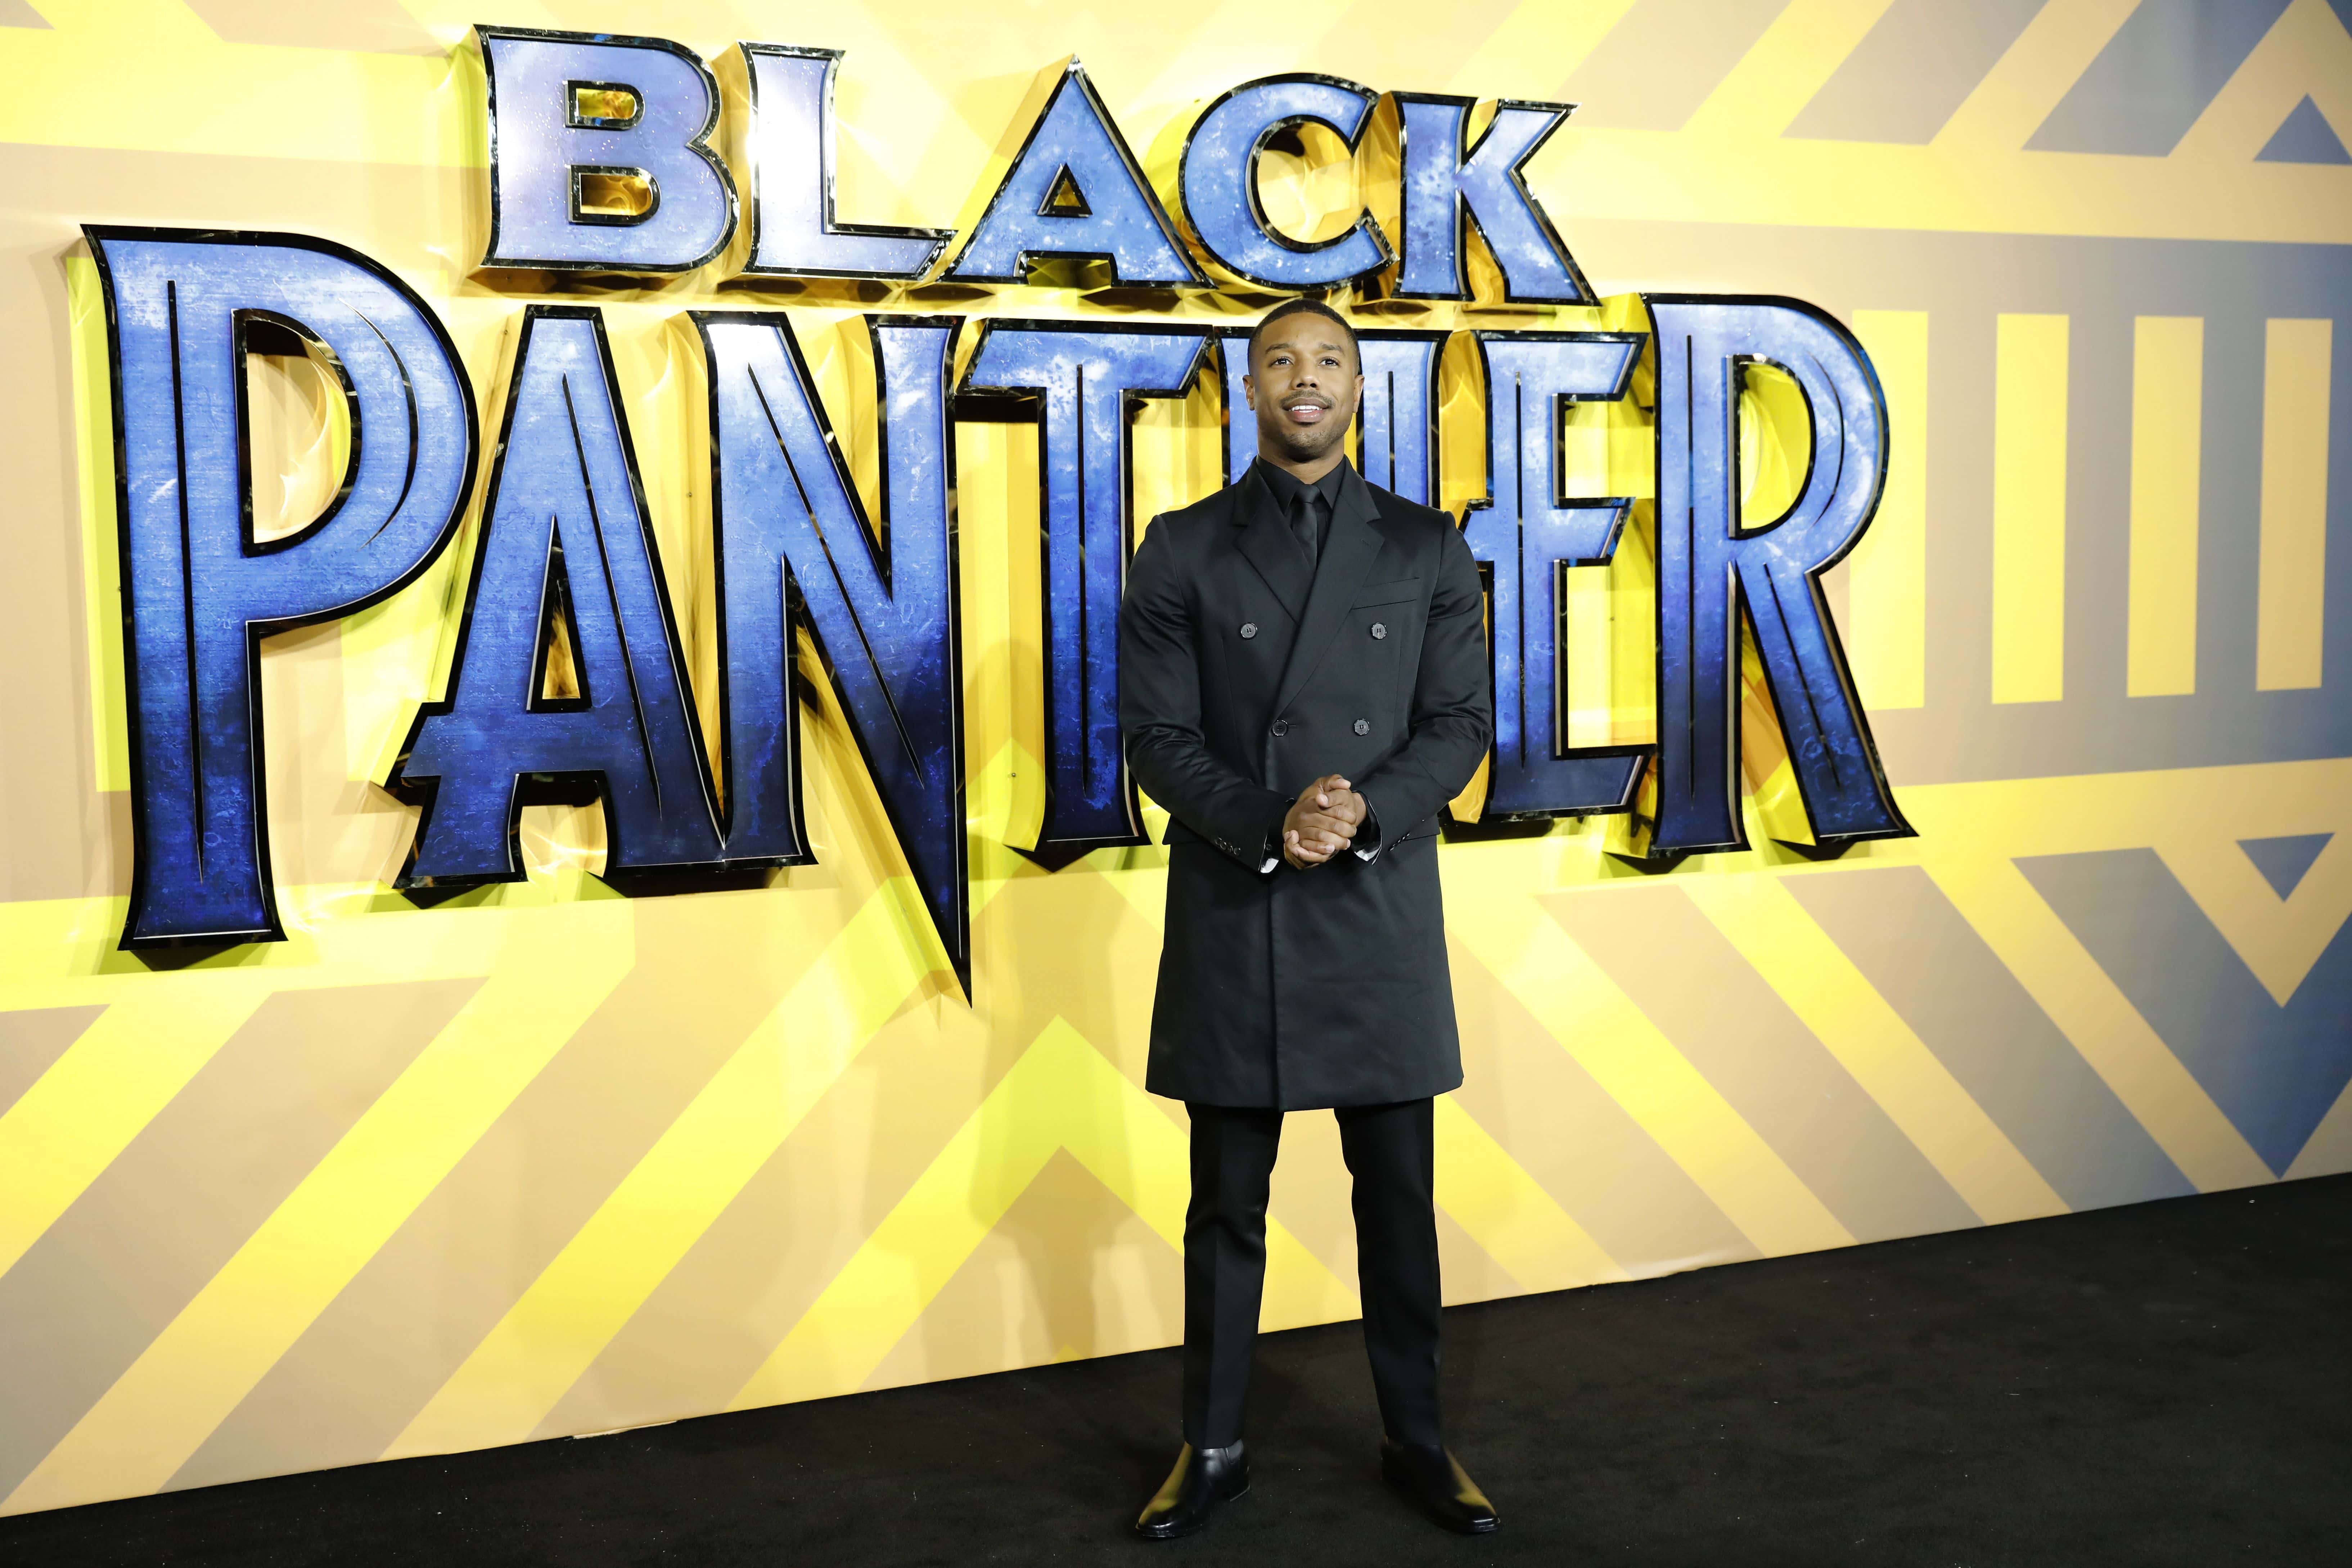 Wakanda Forever! 'Black Panther' makes Oscar history for Diversity and